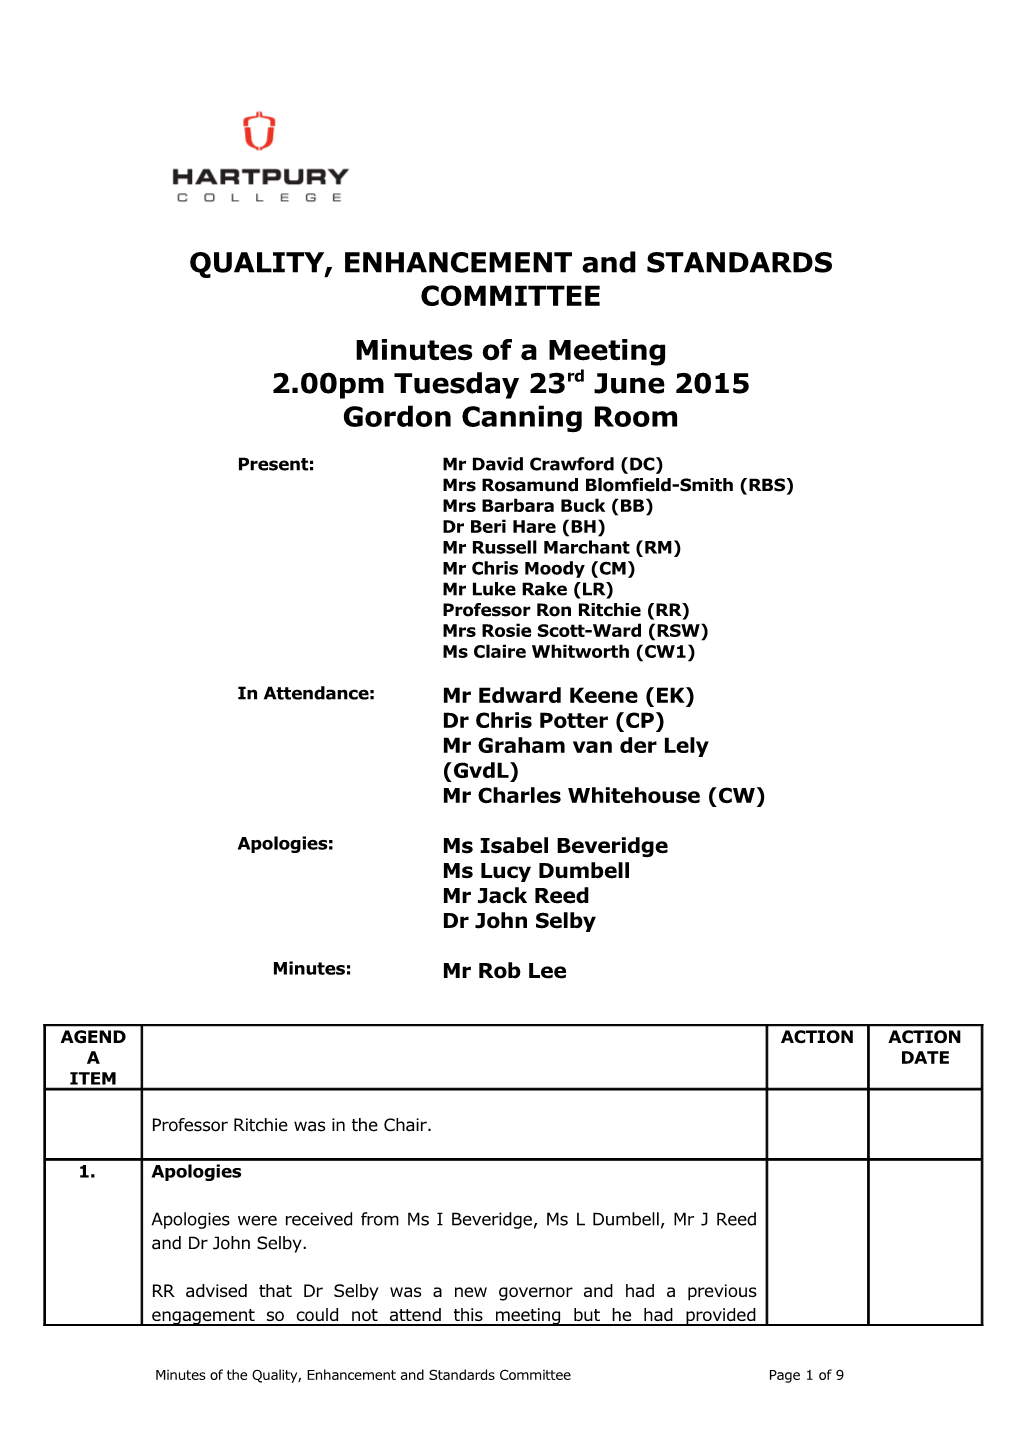 QUALITY, ENHANCEMENT and STANDARDS COMMITTEE